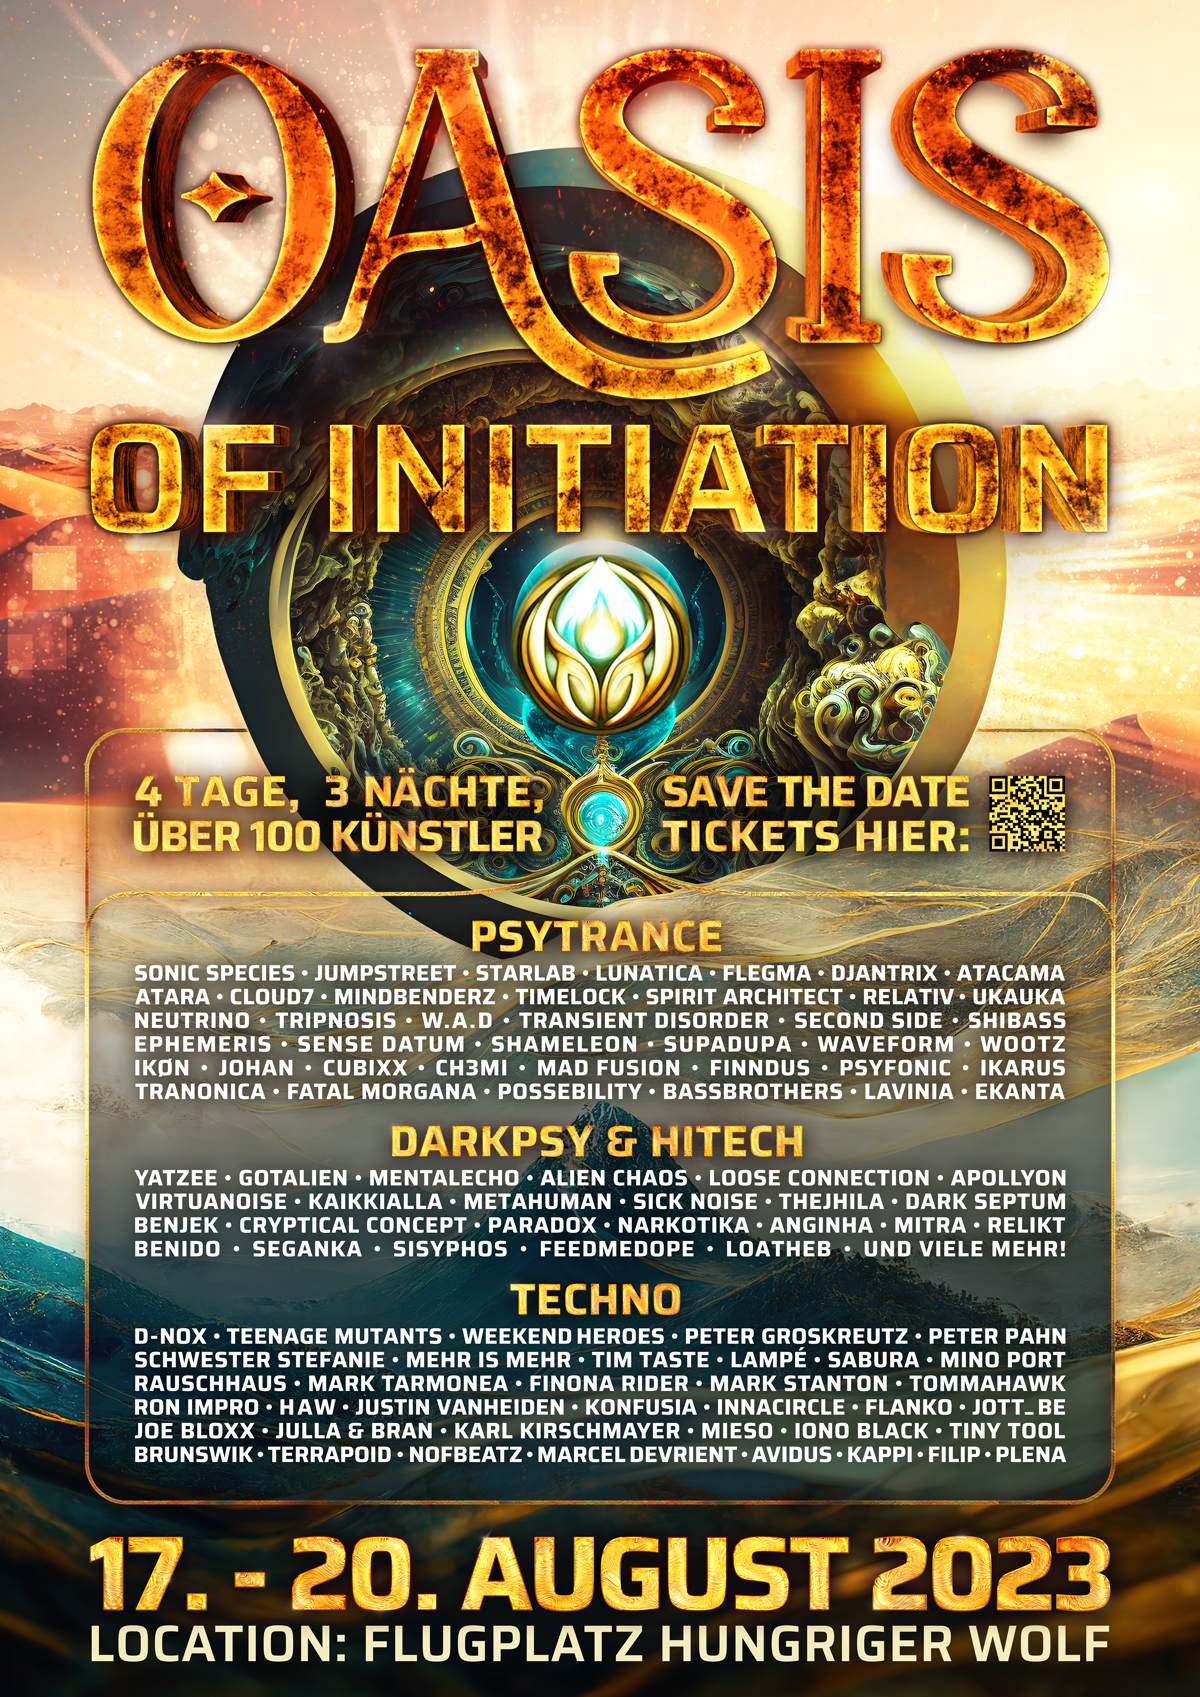 Oasis of Initiation Festival - フライヤー表